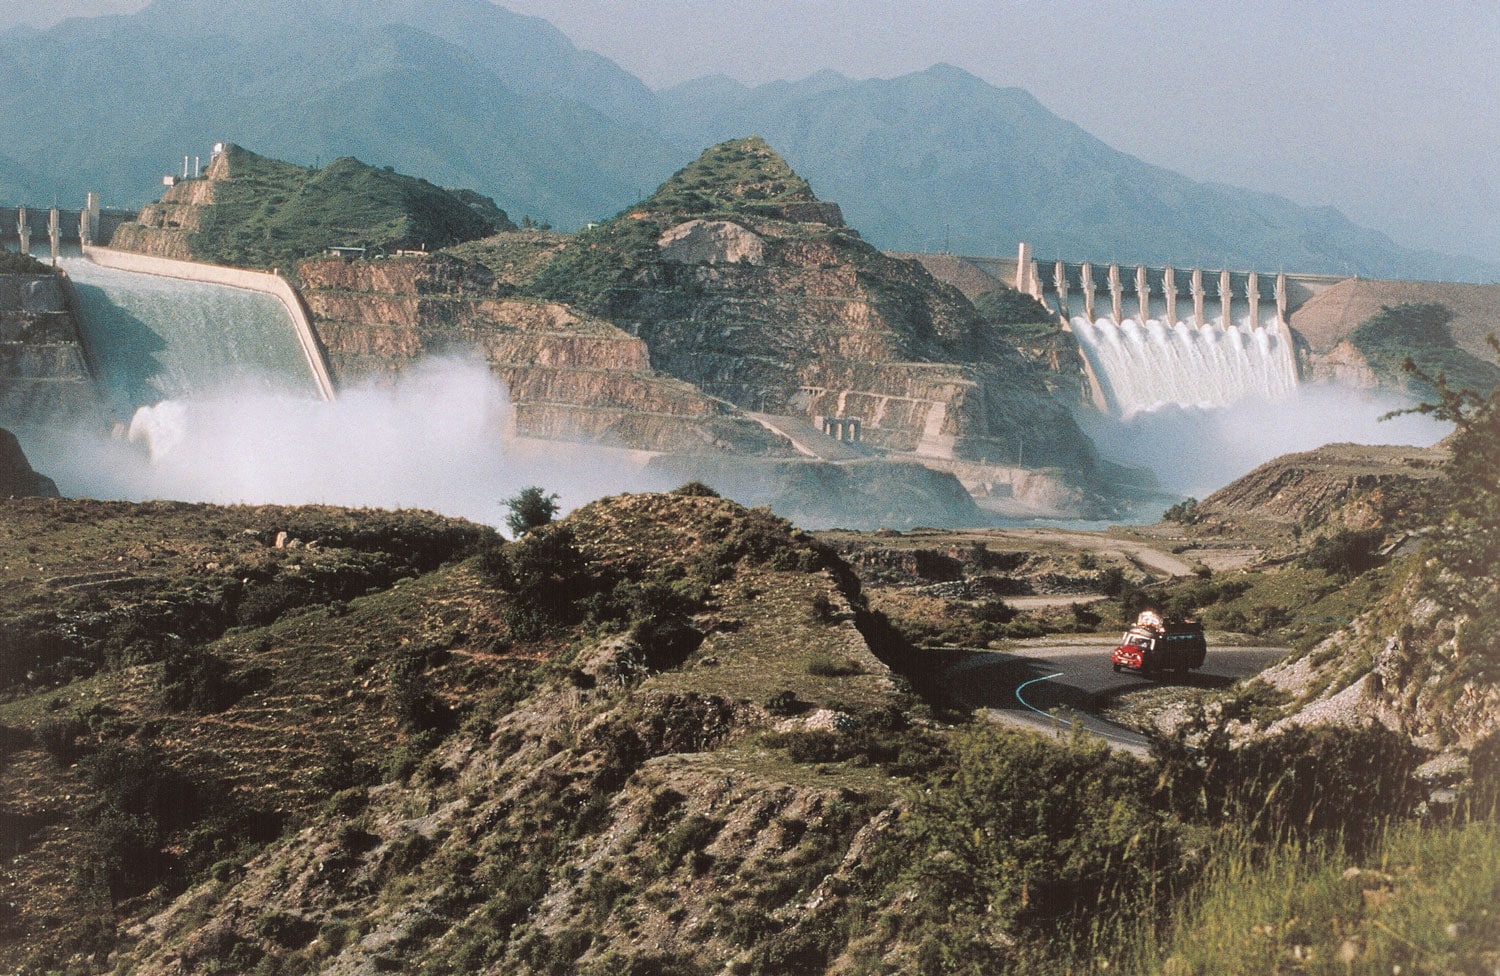 Rocky Mountains and a dam in Bangladesh